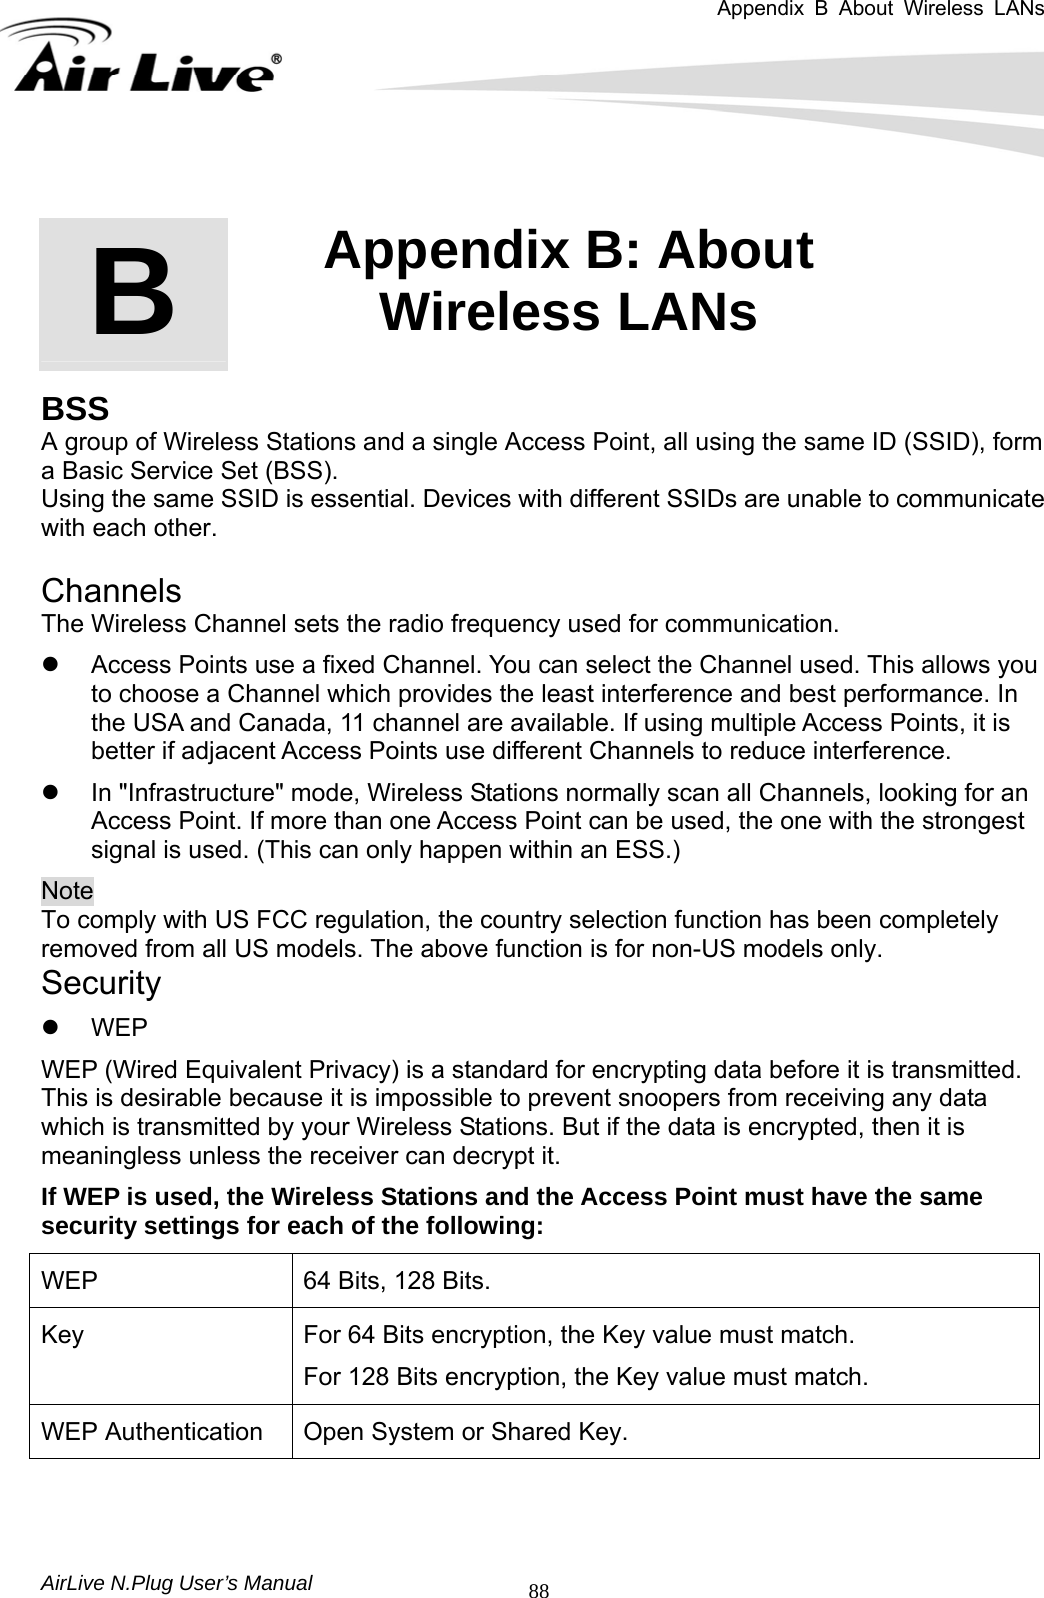 Appendix B About Wireless LANs        AirLive N.Plug User’s Manual  88       BSS A group of Wireless Stations and a single Access Point, all using the same ID (SSID), form a Basic Service Set (BSS).   Using the same SSID is essential. Devices with different SSIDs are unable to communicate with each other.   Channels The Wireless Channel sets the radio frequency used for communication.     z  Access Points use a fixed Channel. You can select the Channel used. This allows you to choose a Channel which provides the least interference and best performance. In the USA and Canada, 11 channel are available. If using multiple Access Points, it is better if adjacent Access Points use different Channels to reduce interference.   z  In &quot;Infrastructure&quot; mode, Wireless Stations normally scan all Channels, looking for an Access Point. If more than one Access Point can be used, the one with the strongest signal is used. (This can only happen within an ESS.)   Note   To comply with US FCC regulation, the country selection function has been completely removed from all US models. The above function is for non-US models only. Security z WEP WEP (Wired Equivalent Privacy) is a standard for encrypting data before it is transmitted. This is desirable because it is impossible to prevent snoopers from receiving any data which is transmitted by your Wireless Stations. But if the data is encrypted, then it is meaningless unless the receiver can decrypt it.   If WEP is used, the Wireless Stations and the Access Point must have the same security settings for each of the following: WEP  64 Bits, 128 Bits. Key  For 64 Bits encryption, the Key value must match.     For 128 Bits encryption, the Key value must match. WEP Authentication  Open System or Shared Key.   B  Appendix B: About Wireless LANs  